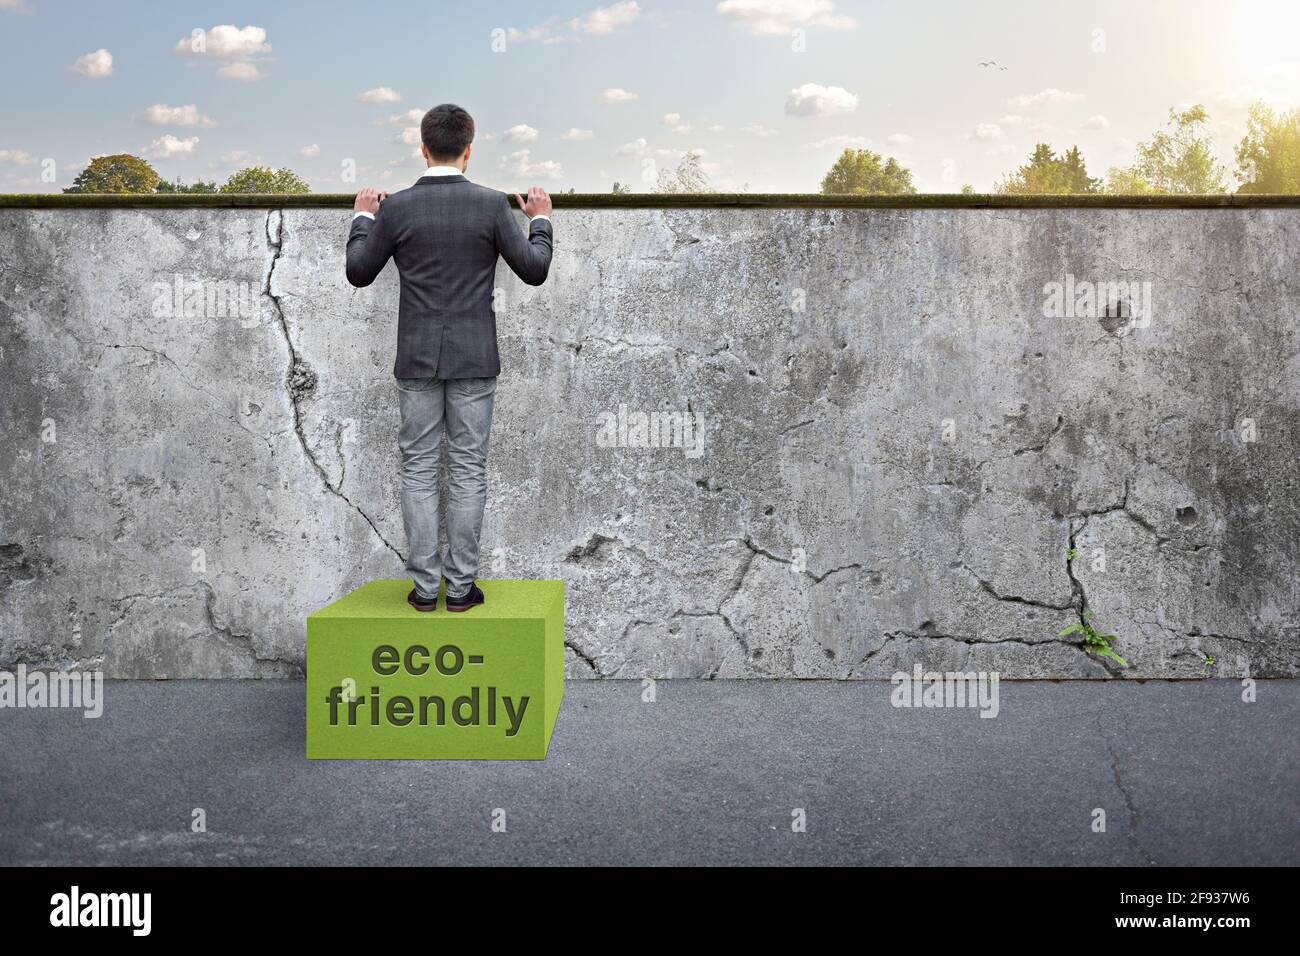 Concept in favor of an eco-friendly future Stock Photo